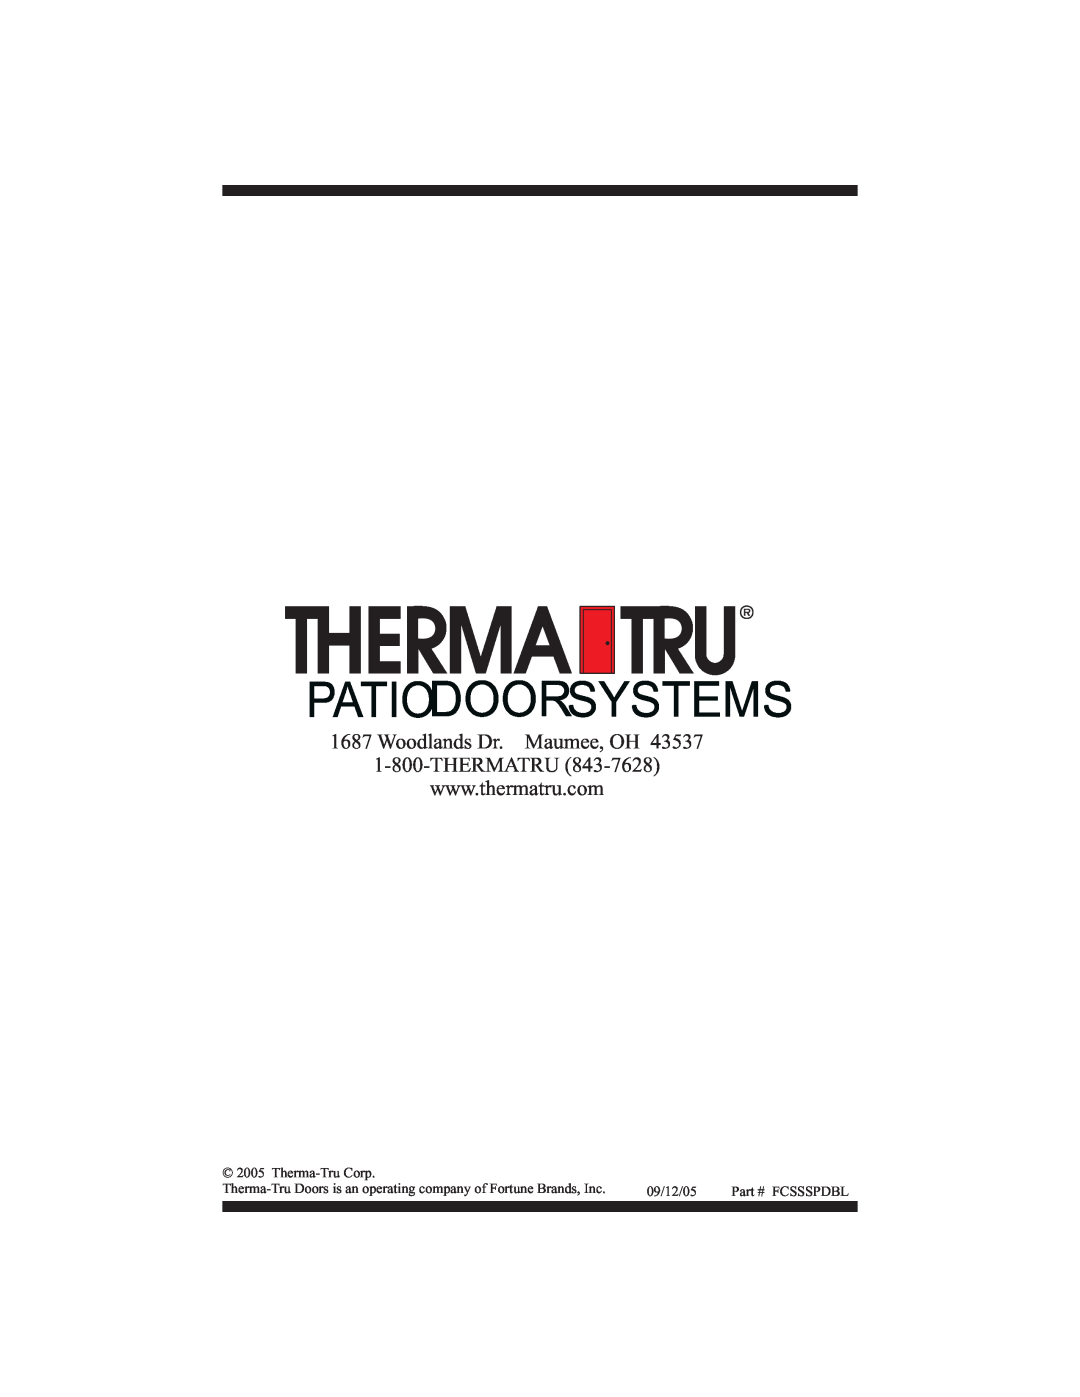 Therma-Tru Smooth-Star, Fiber-Classic Patiodoorsystems, Woodlands Dr. Maumee, OH 1-800-THERMATRU, Therma-TruCorp, 09/12/05 